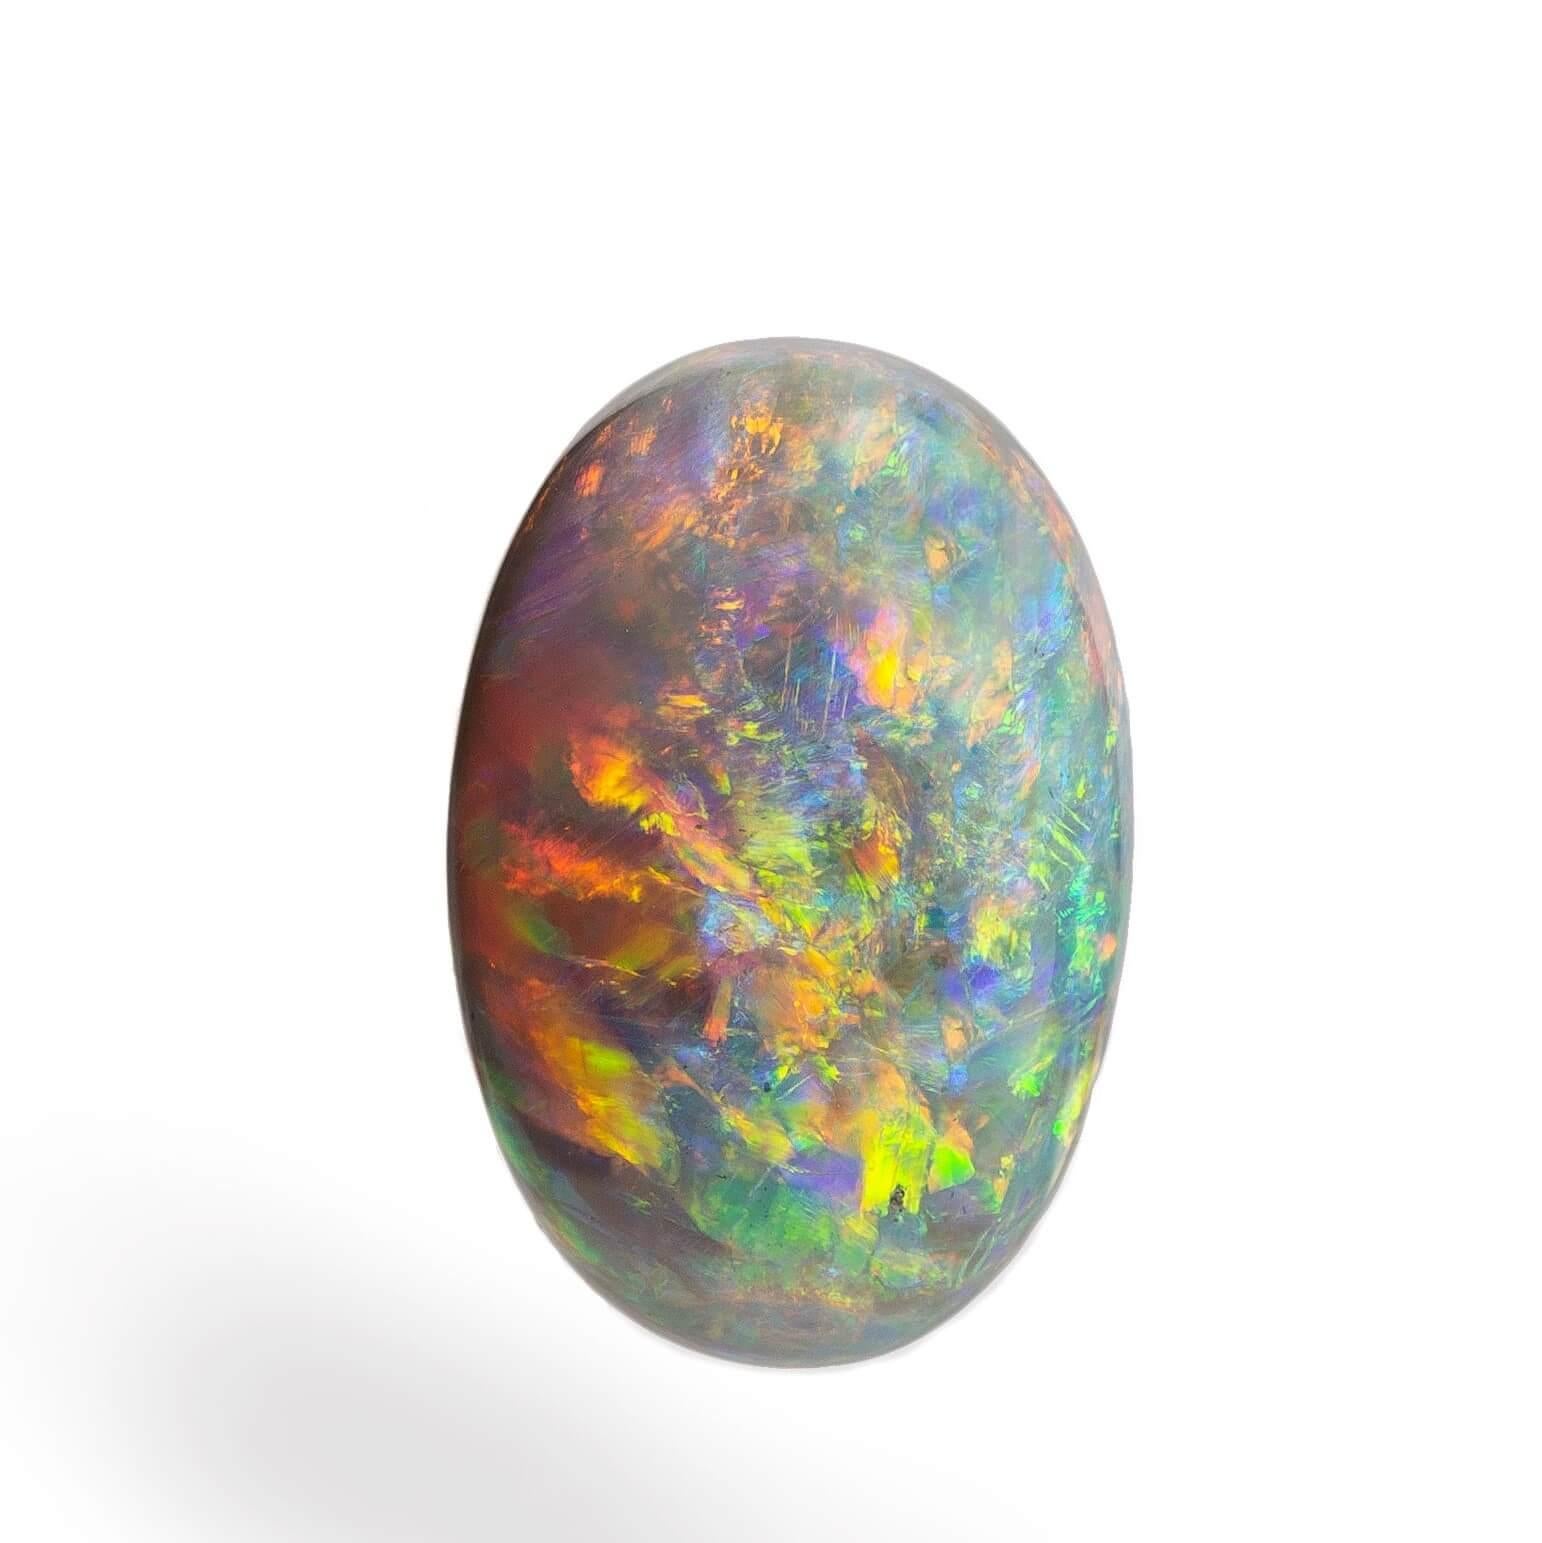 Australia is the birthplace of the most beautiful precious opal gemstones in the world. Fine Australian opals mesmerise with colours changing and shifting the gem moves with an unrivalled vibrancy.

This boulder opal was ethically sourced from